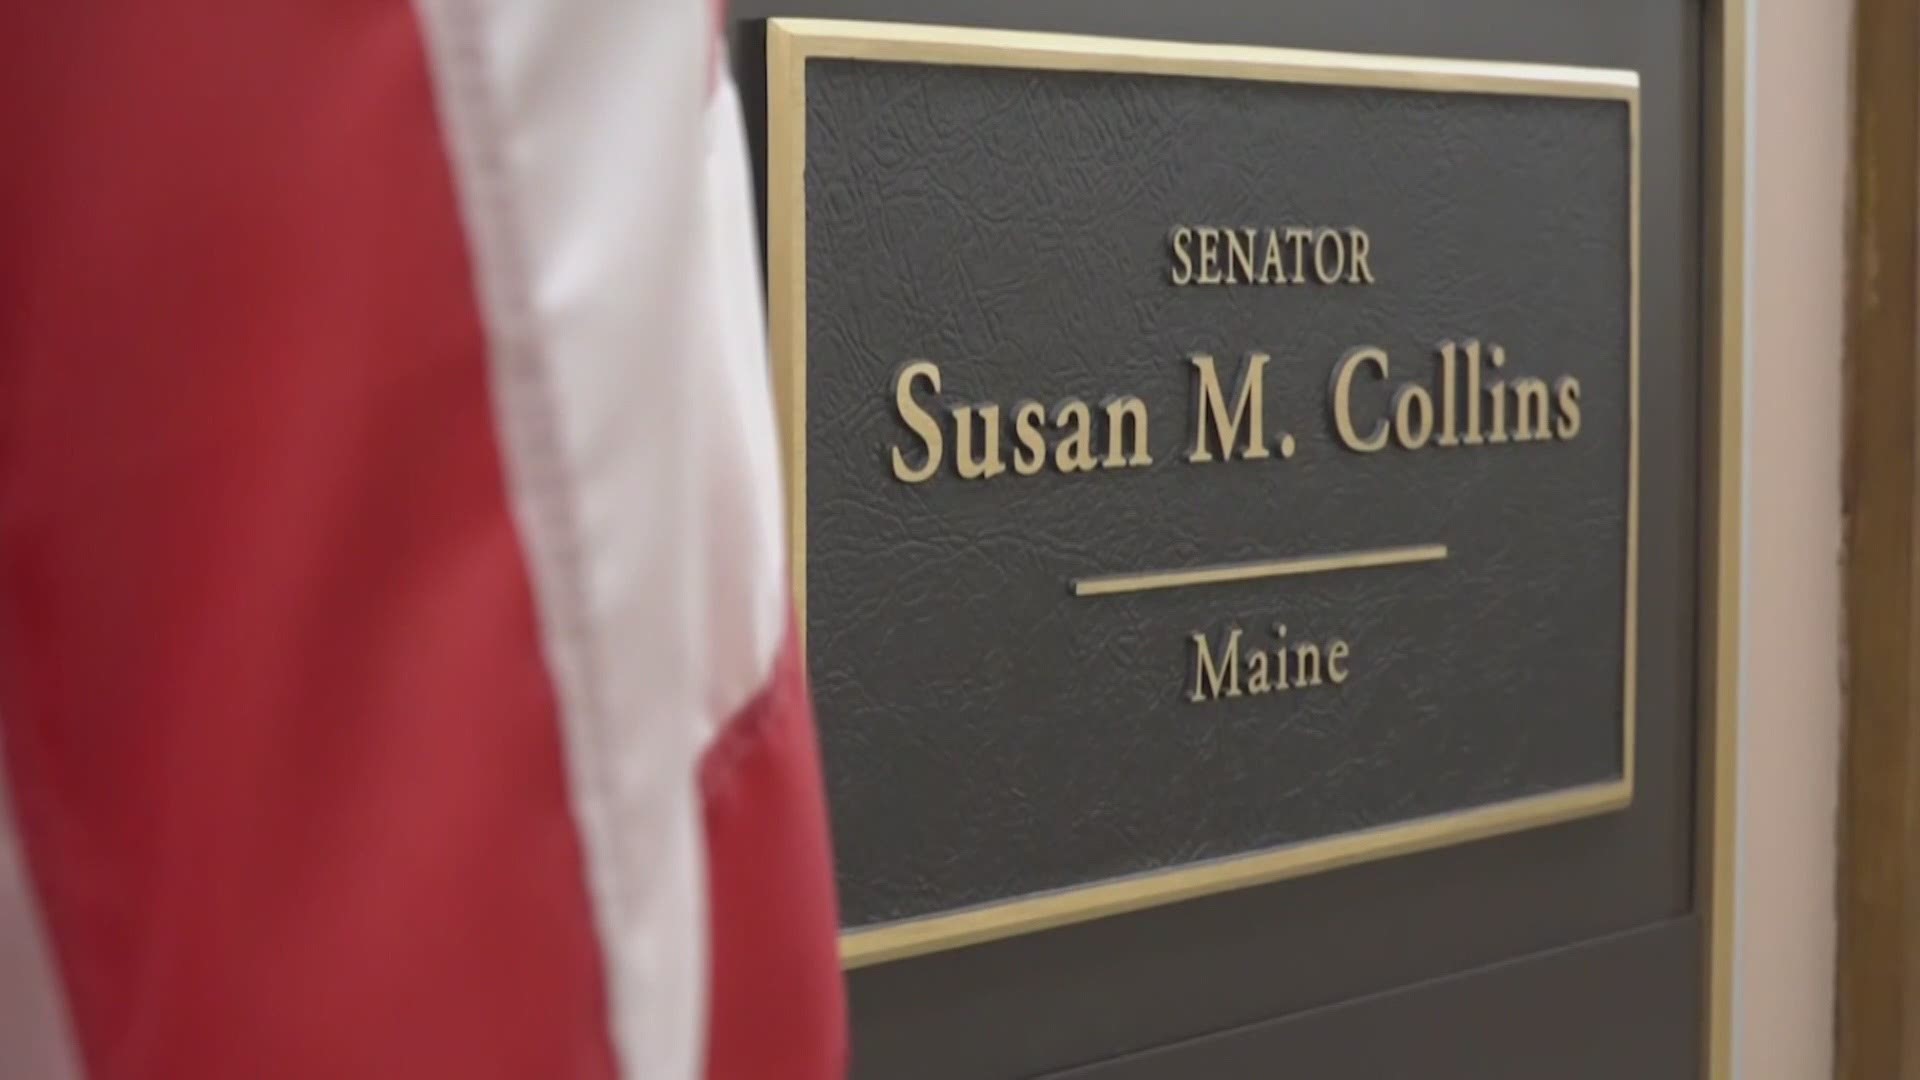 A woman from Bangor accused of making death threats against senator Susan Collins was granted an in person hearing.